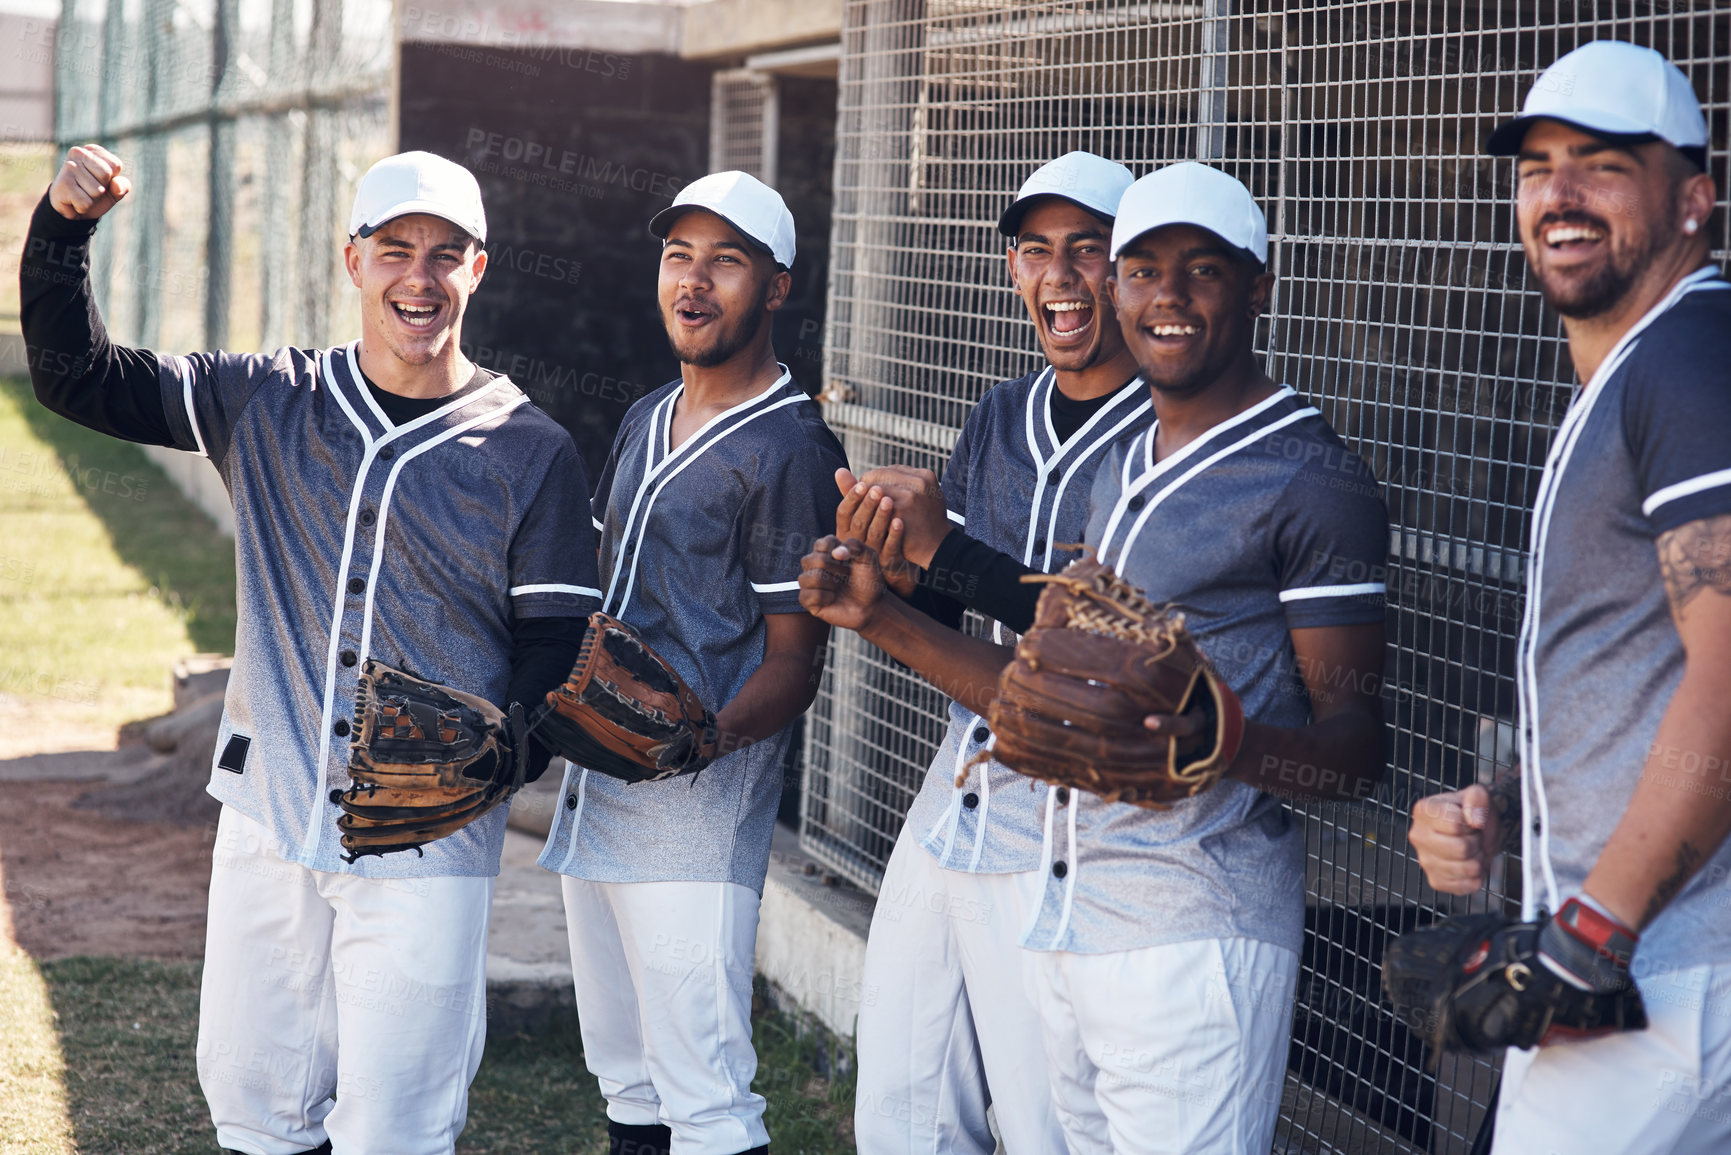 Buy stock photo Shot of a group of young baseball players celebrating after watching a game